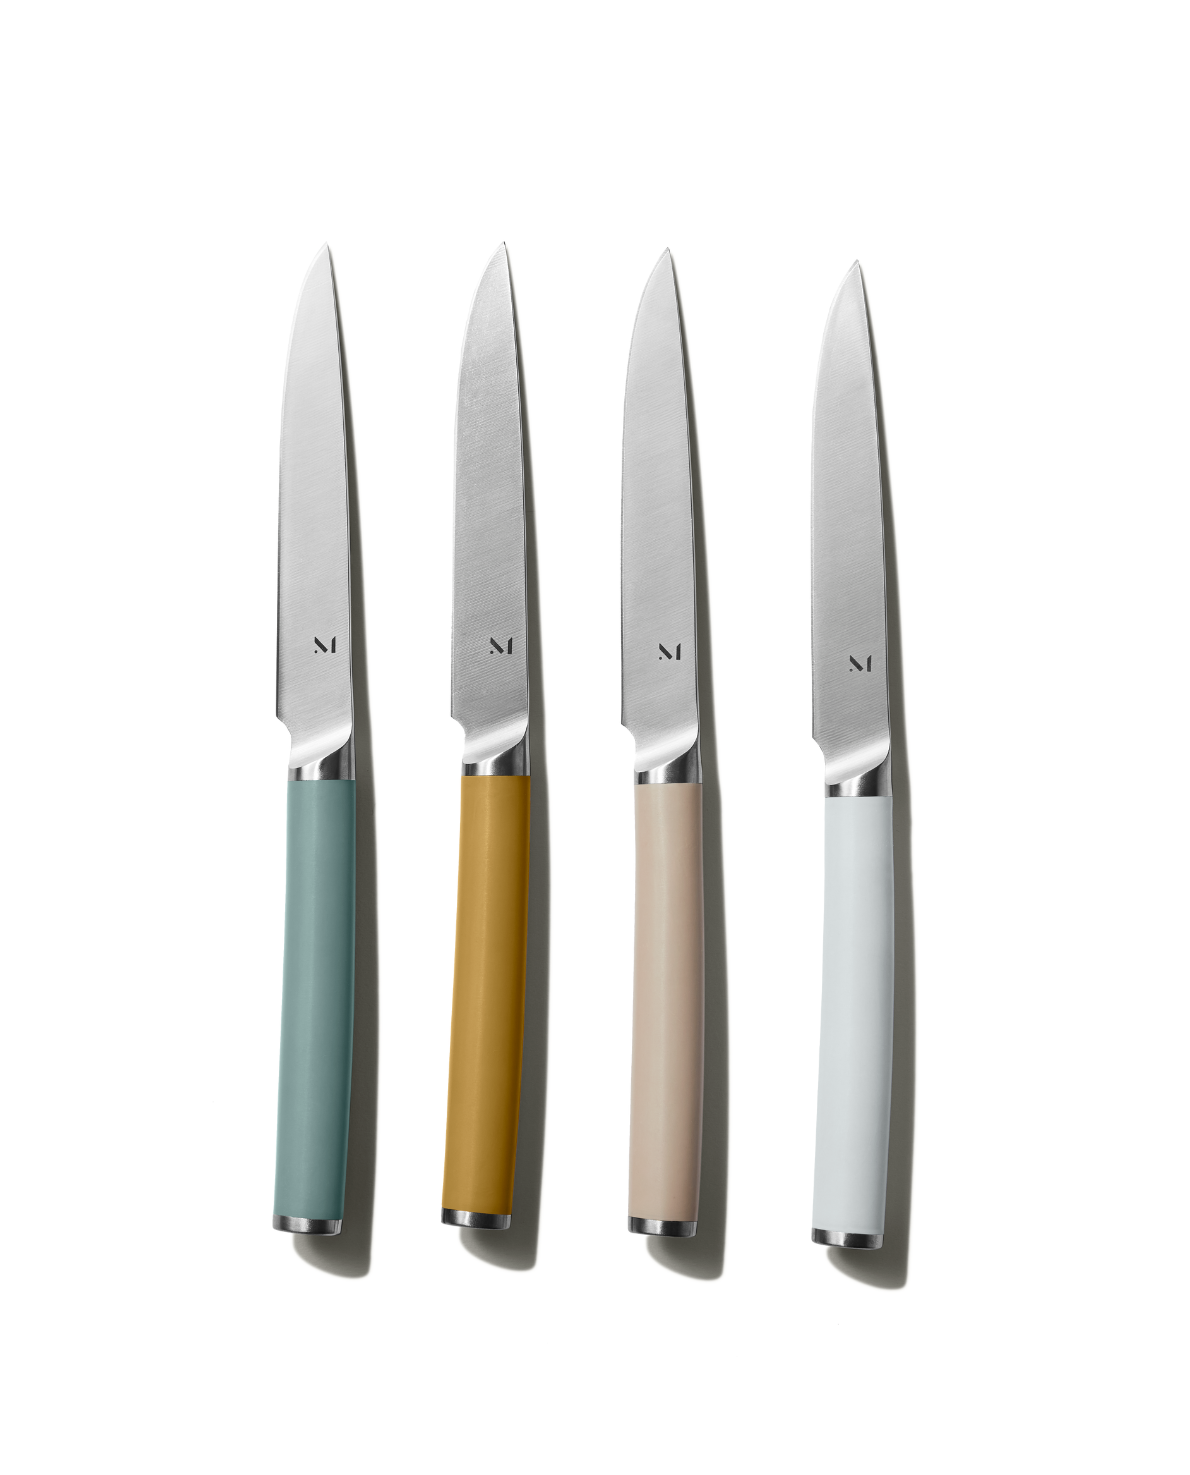 It's time you actually get a set of matching knives for your